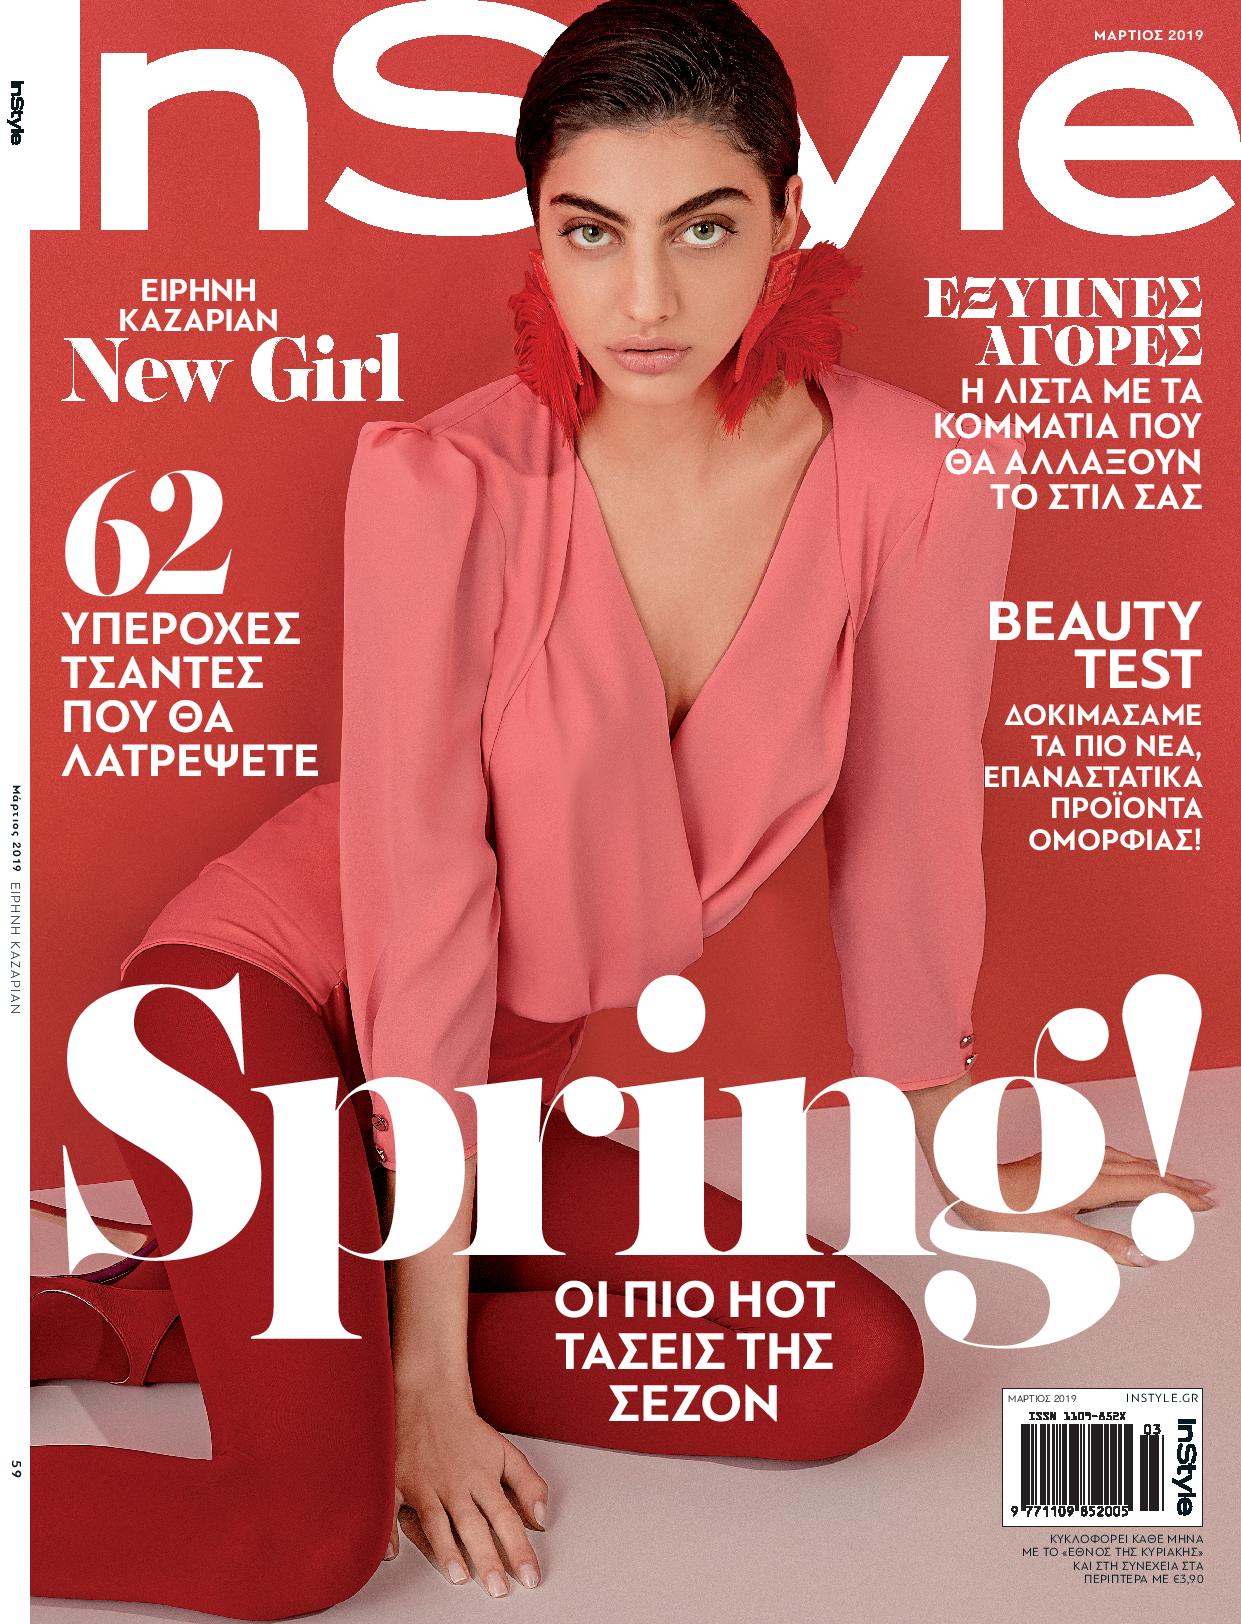 instyle_march.cover_.irenekazarian_new-page-001.jpg